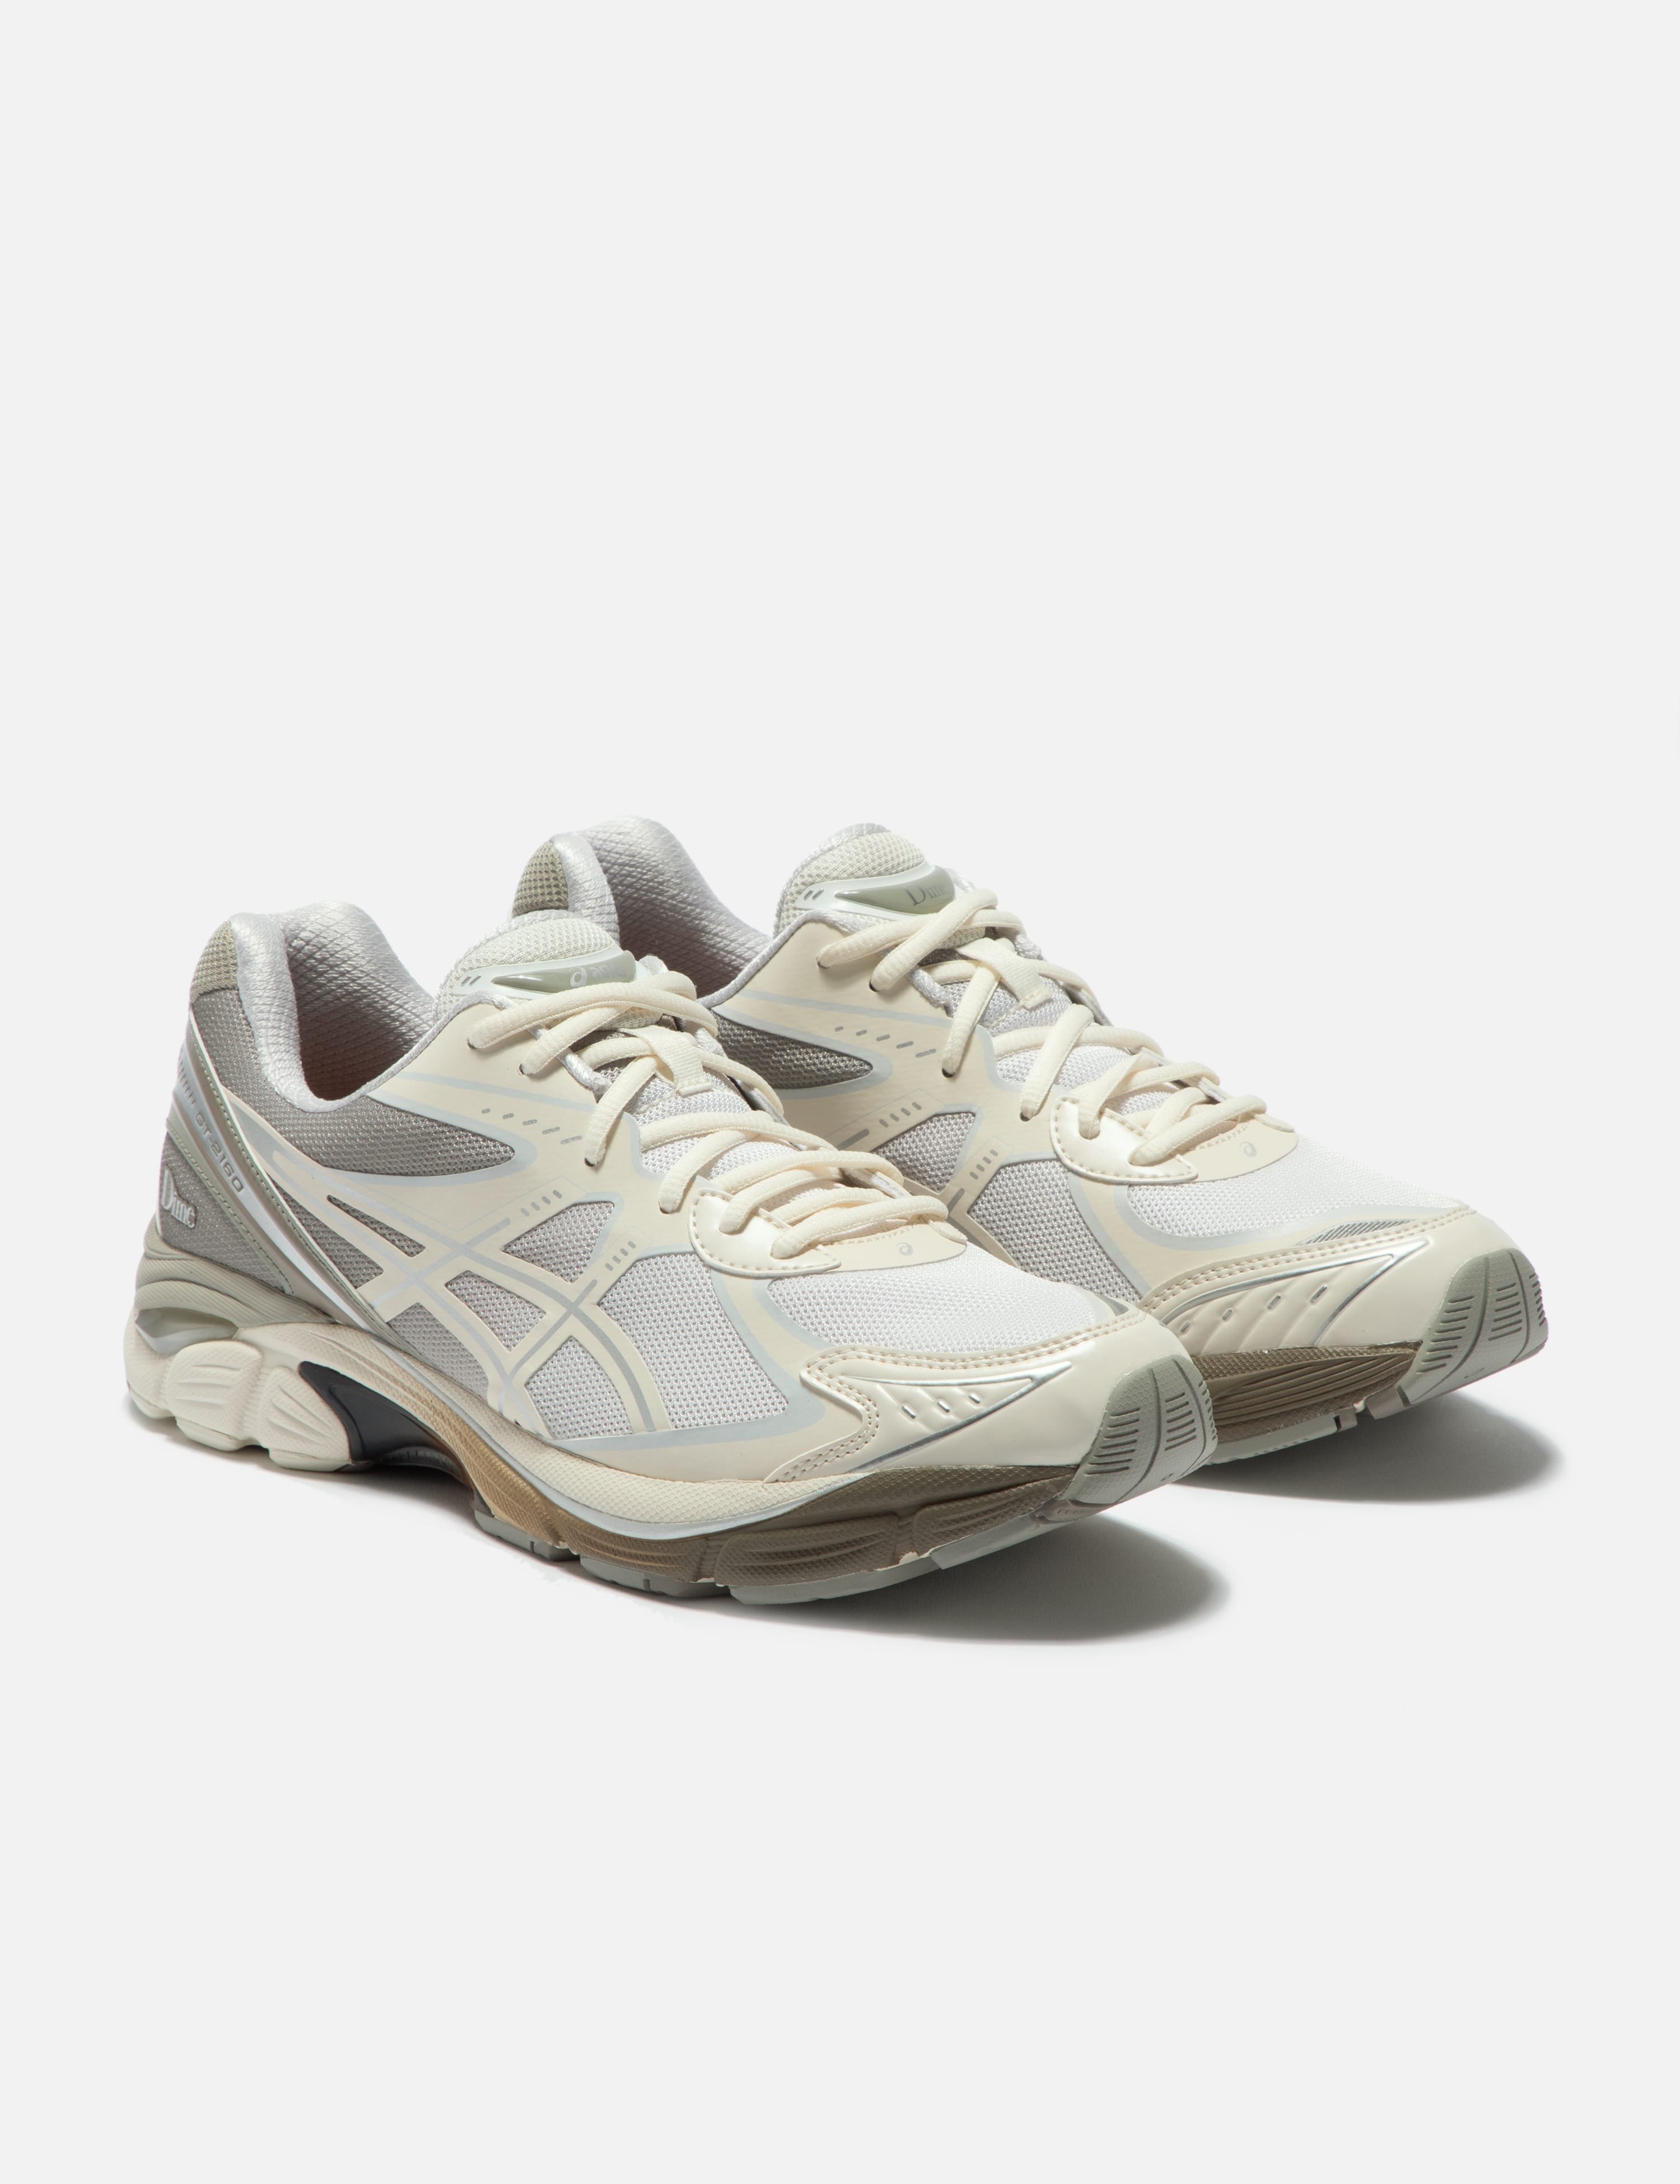 Asics - Asics X Dime GT-2160 | HBX - Globally Curated Fashion and